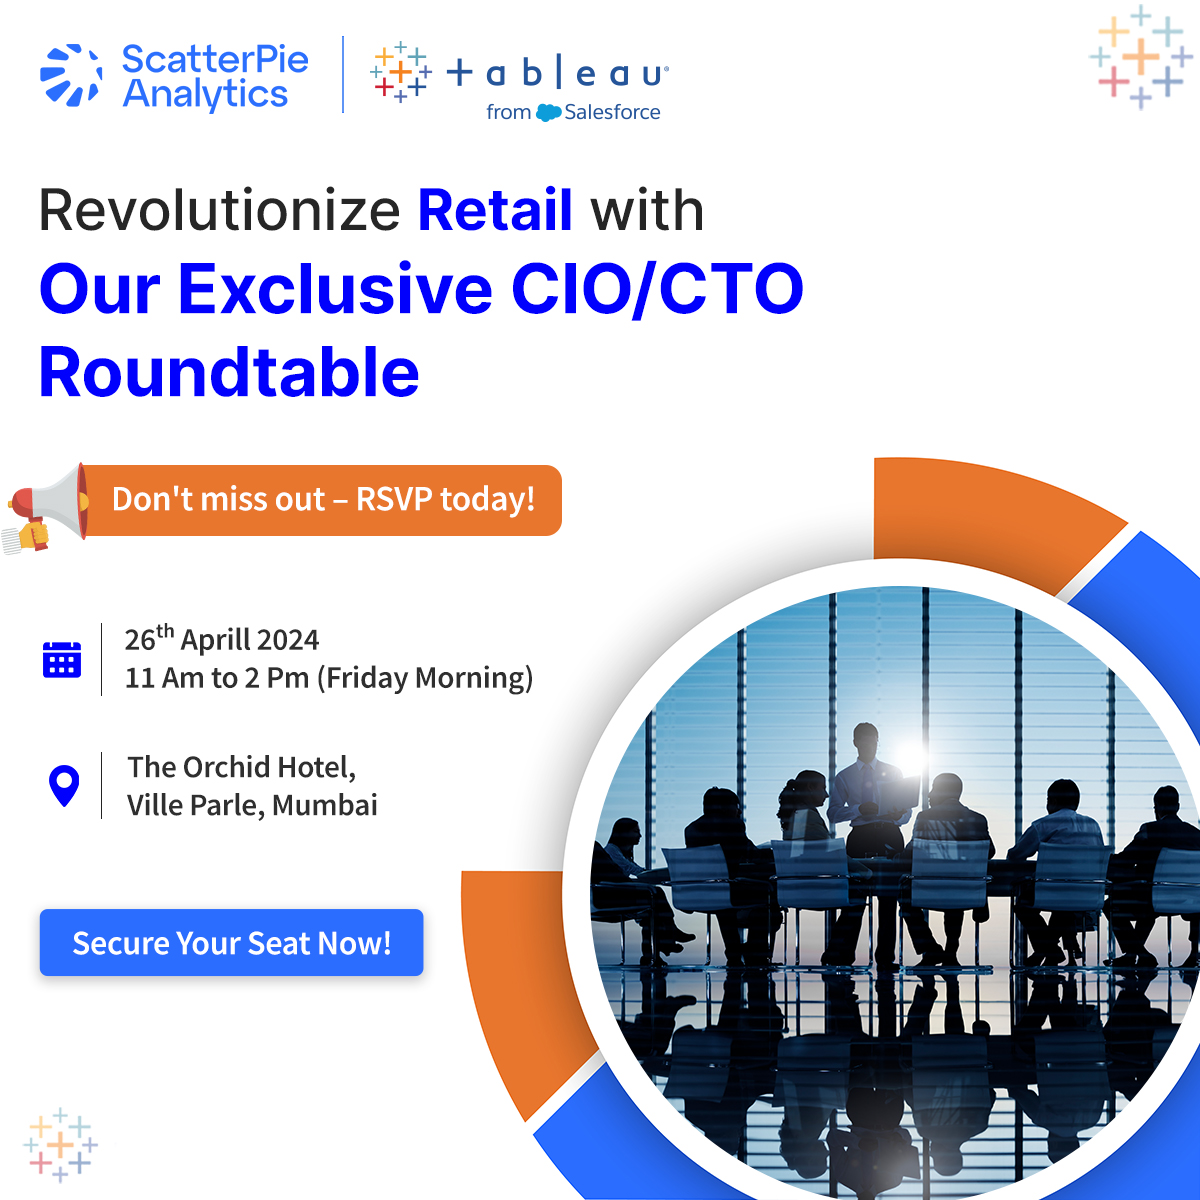 📢Calling All Retail Innovators: Join Our CIO/CTO Roundtable Meet 🌟

📅 Date: 26th April, 2024
🕒 Time: 11 Am to 2 Pm (Friday Morning)
🏢 Venue: The Orchid Hotel, Ville Parle, Mumbai

#ScatterpieAnalytics #CIO #CTO #RoundtableMeet #RetailIndustry